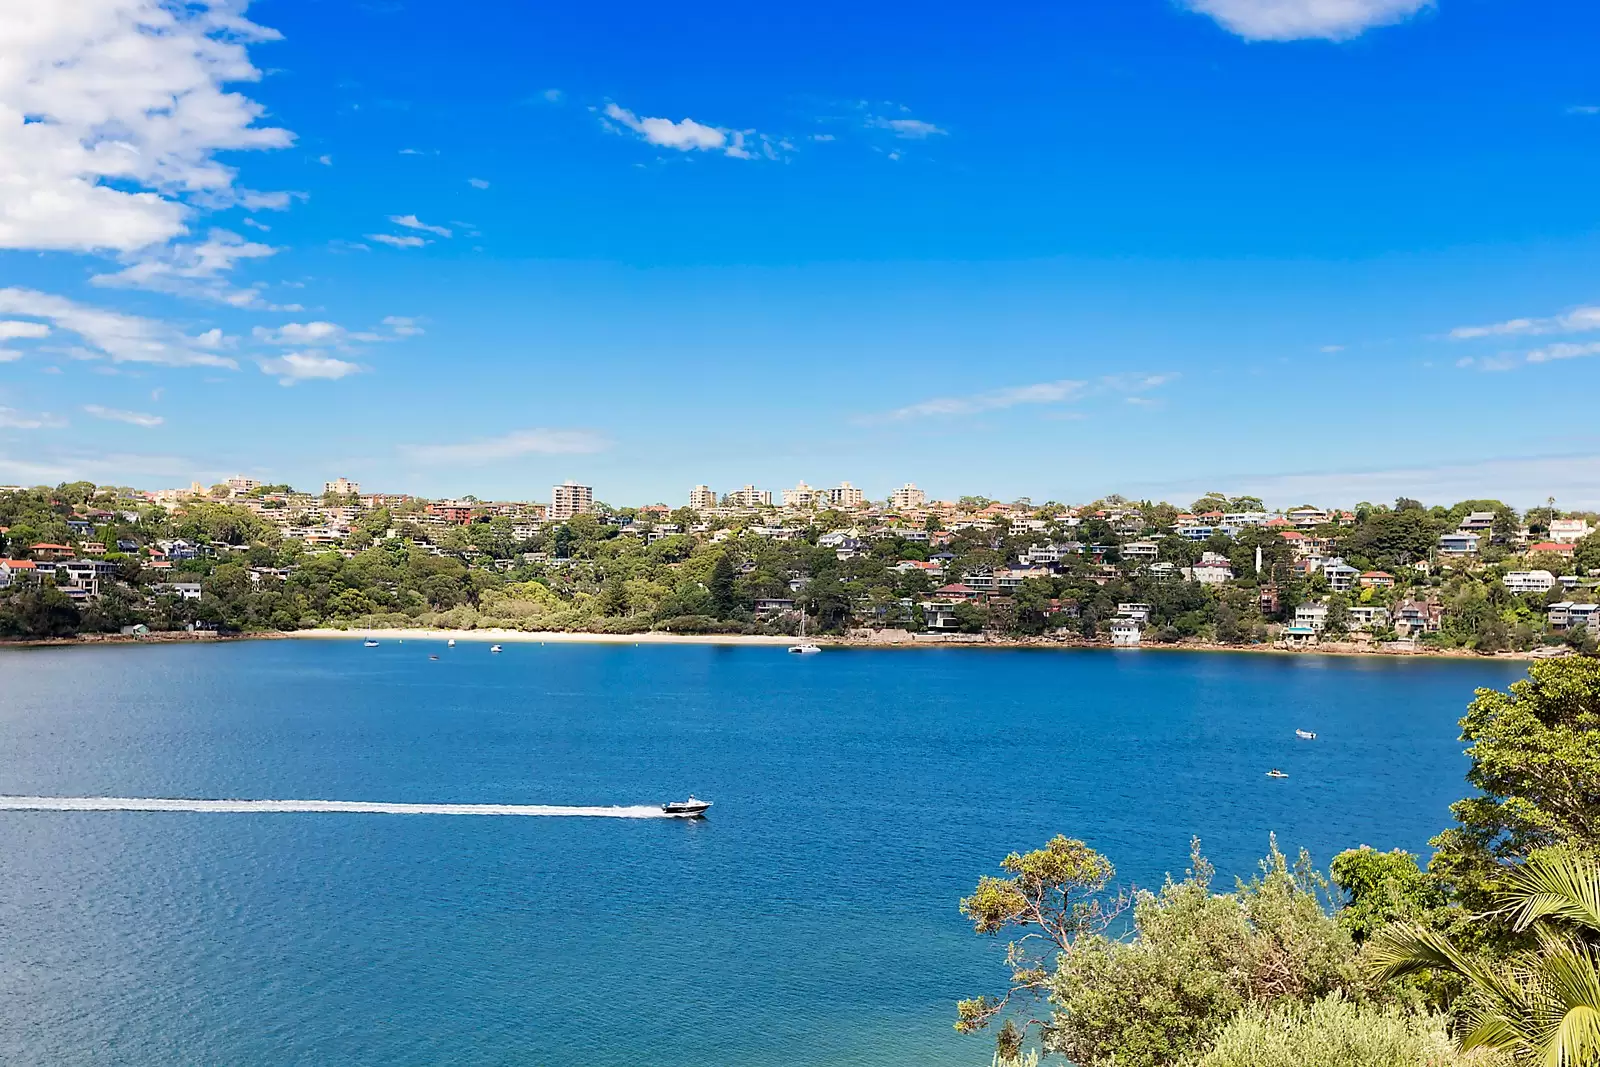 Photo #16: 1-3 Amiens Road, Clontarf - Sold by Sydney Sotheby's International Realty